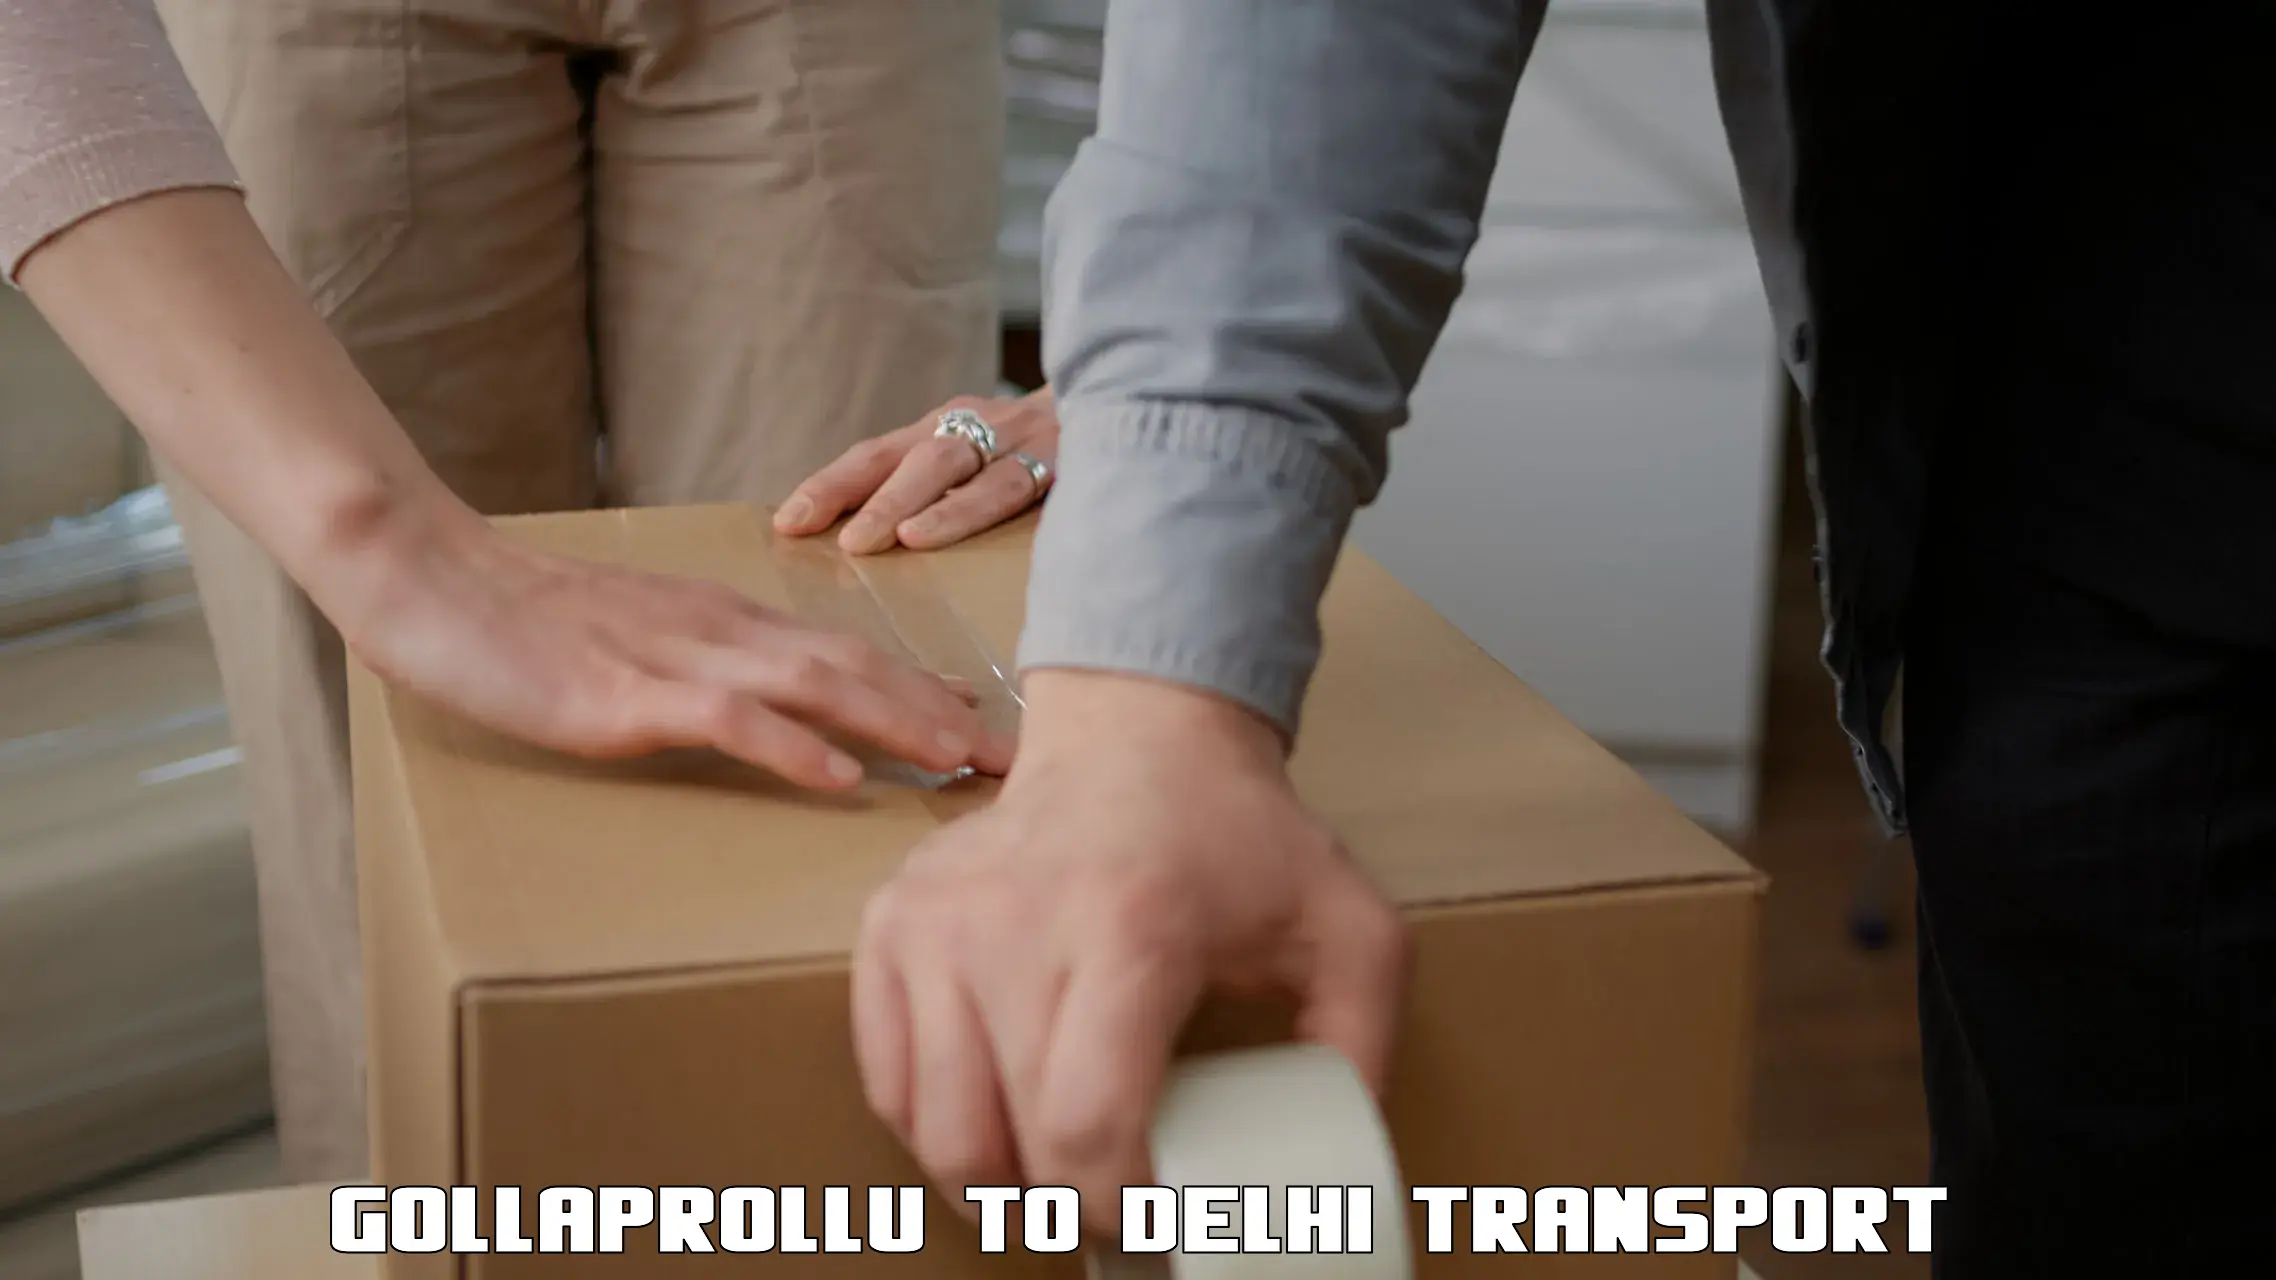 Package delivery services Gollaprollu to Kalkaji